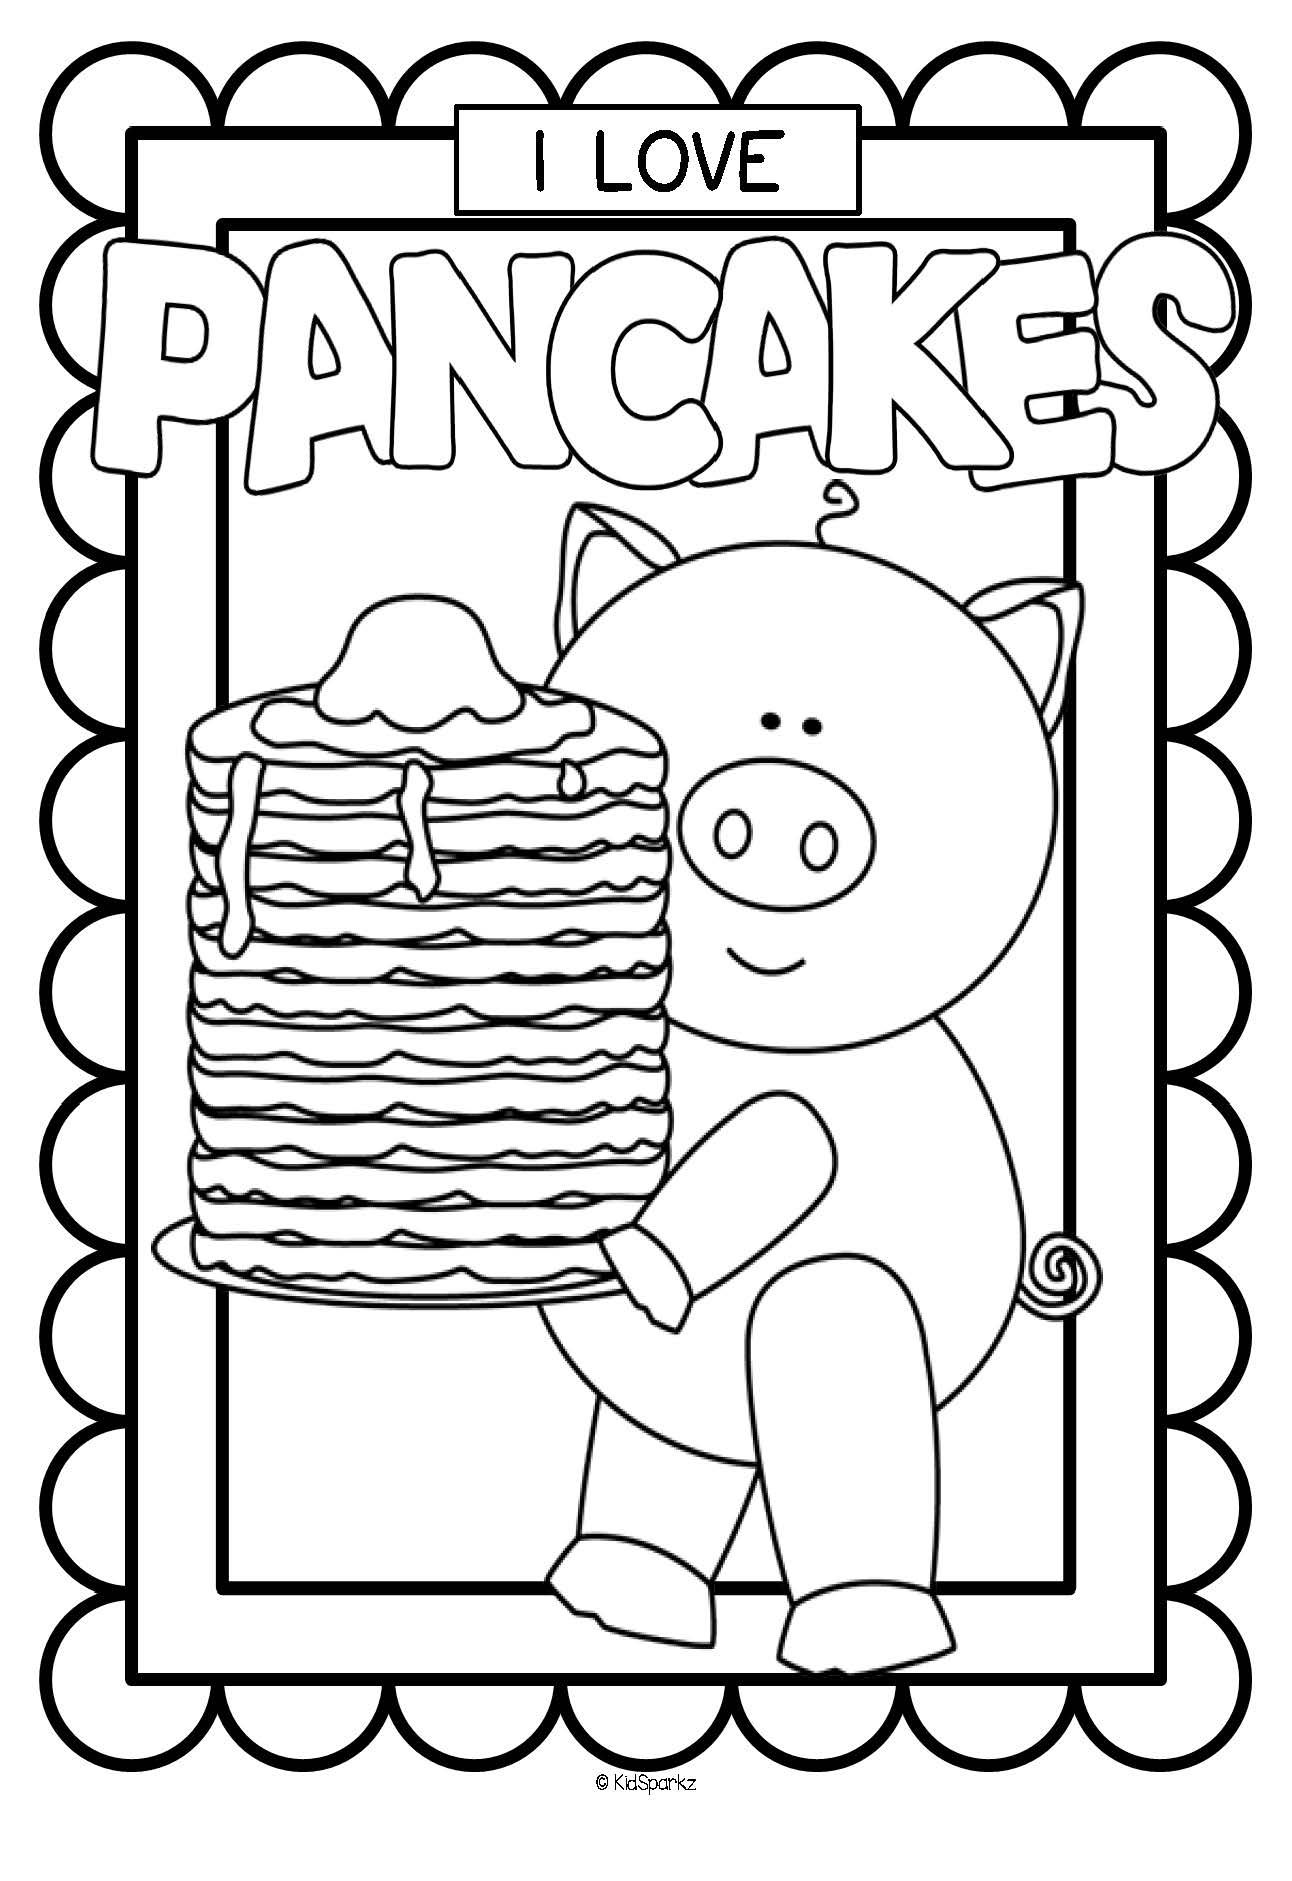 Pancake Day and I Love Pancakes Posters Coloring Printables FREE | Pancake  day, Letter a crafts, Cool coloring pages